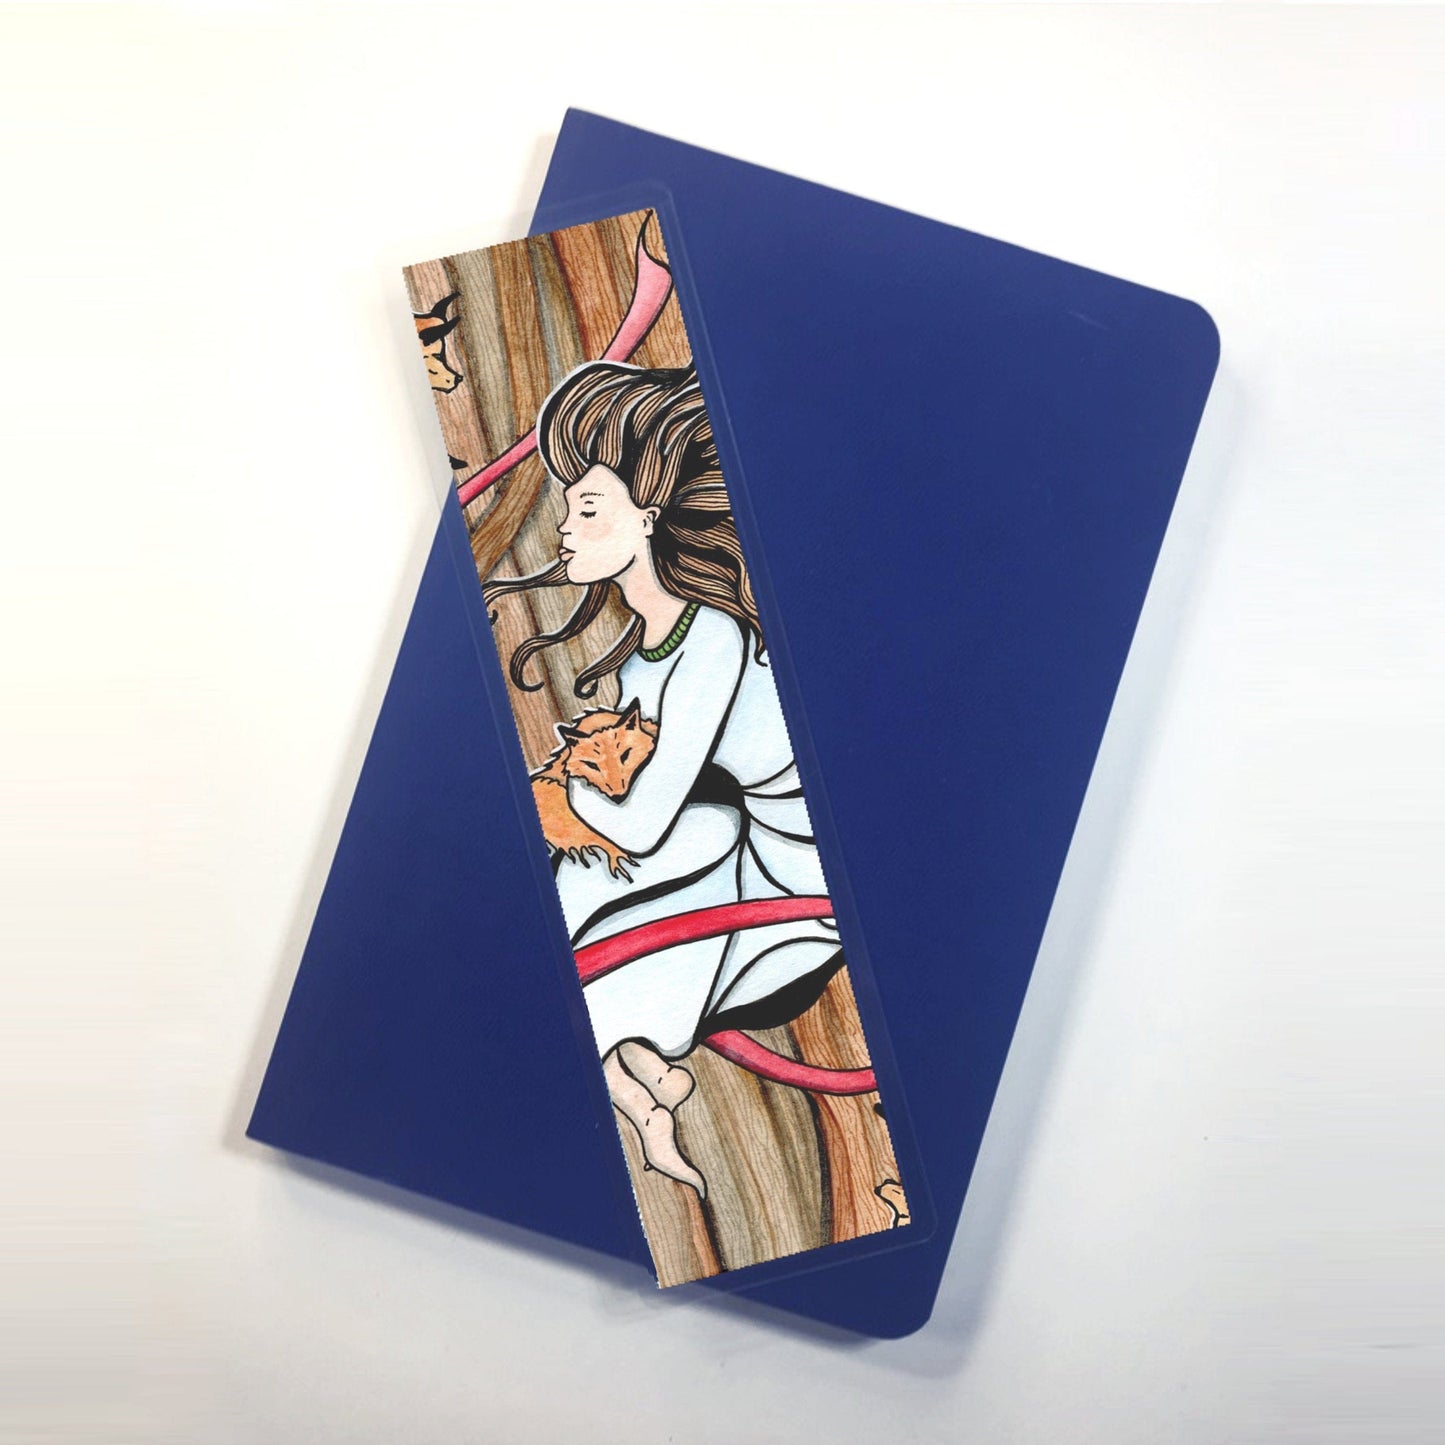 PinkPolish Design Bookmarks "Guarded" 2-Sided Bookmark